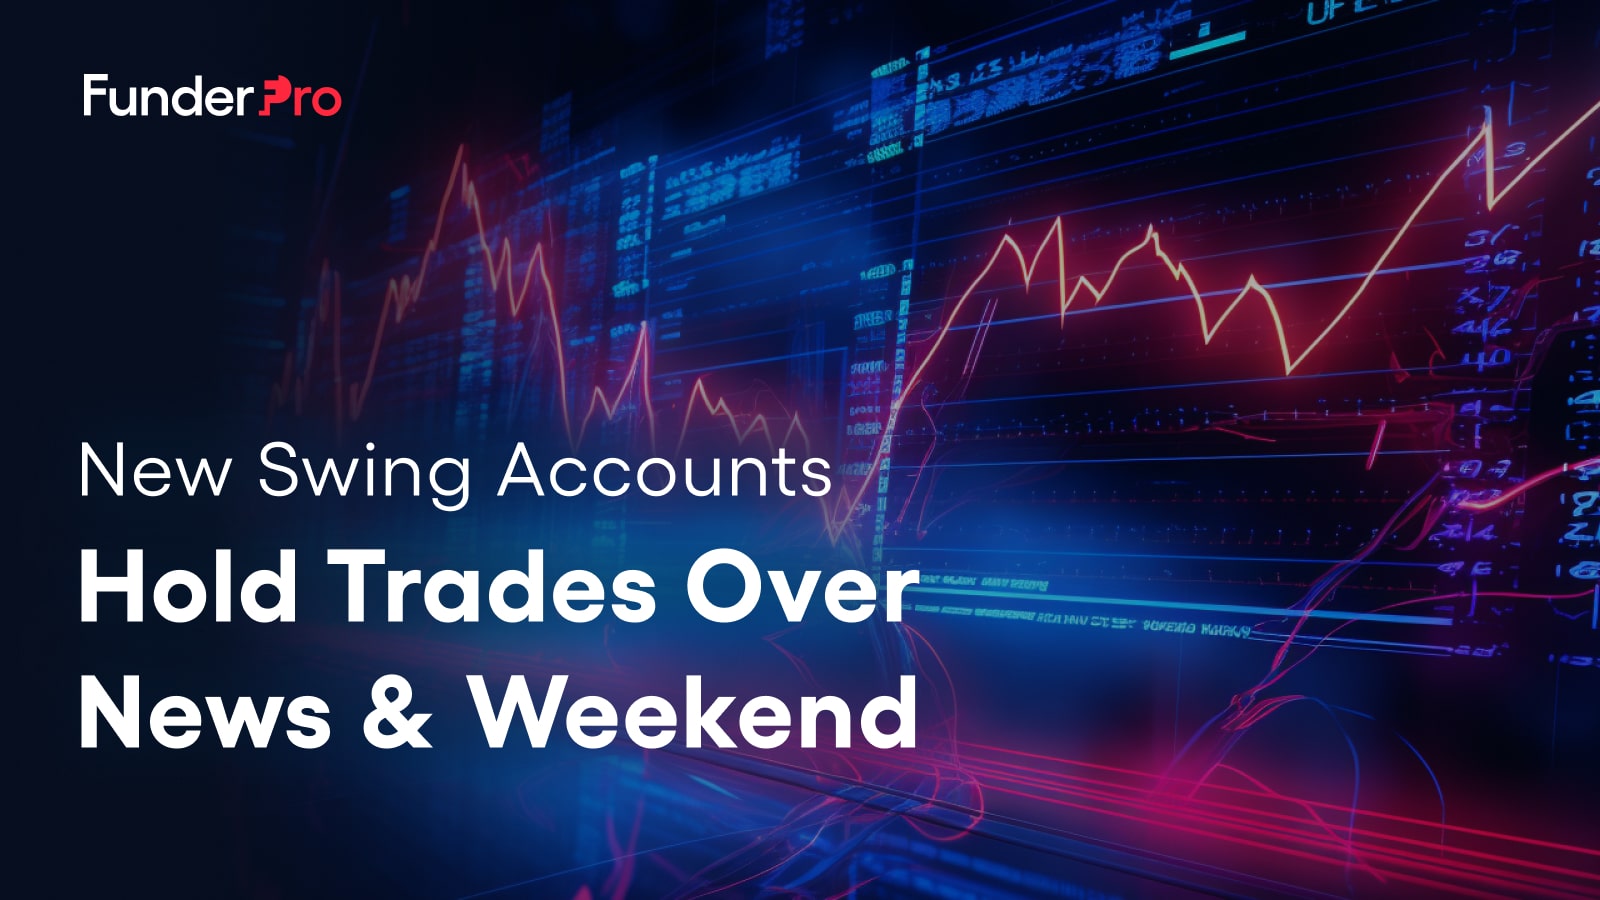 FunderPro now offers a Swing Account type. Hold your trades over weekends and news events. No Consistency rule and no minimum trading days.